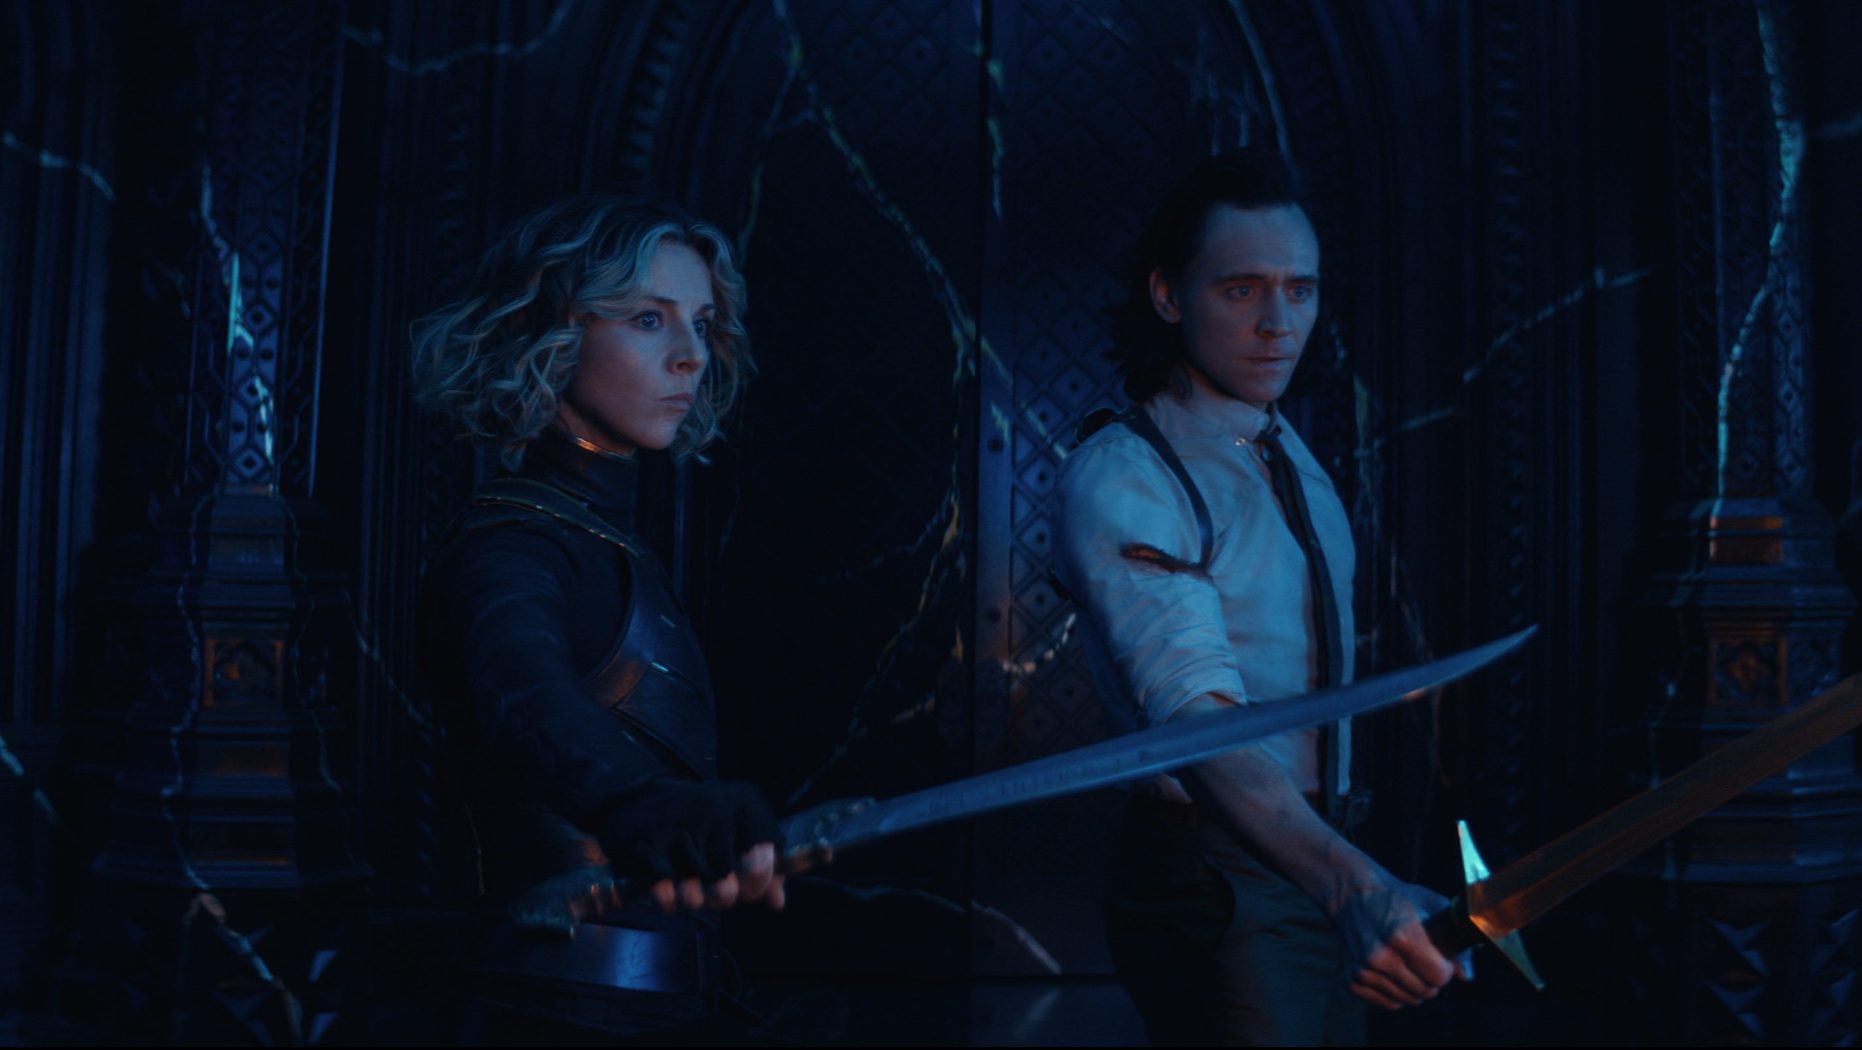 Loki (Tom Hiddleston) and Sylvie (Sophia Di Martino) holding out knives and learning who's behind the TVA, leaving questions for Loki Season 2 of this TV series